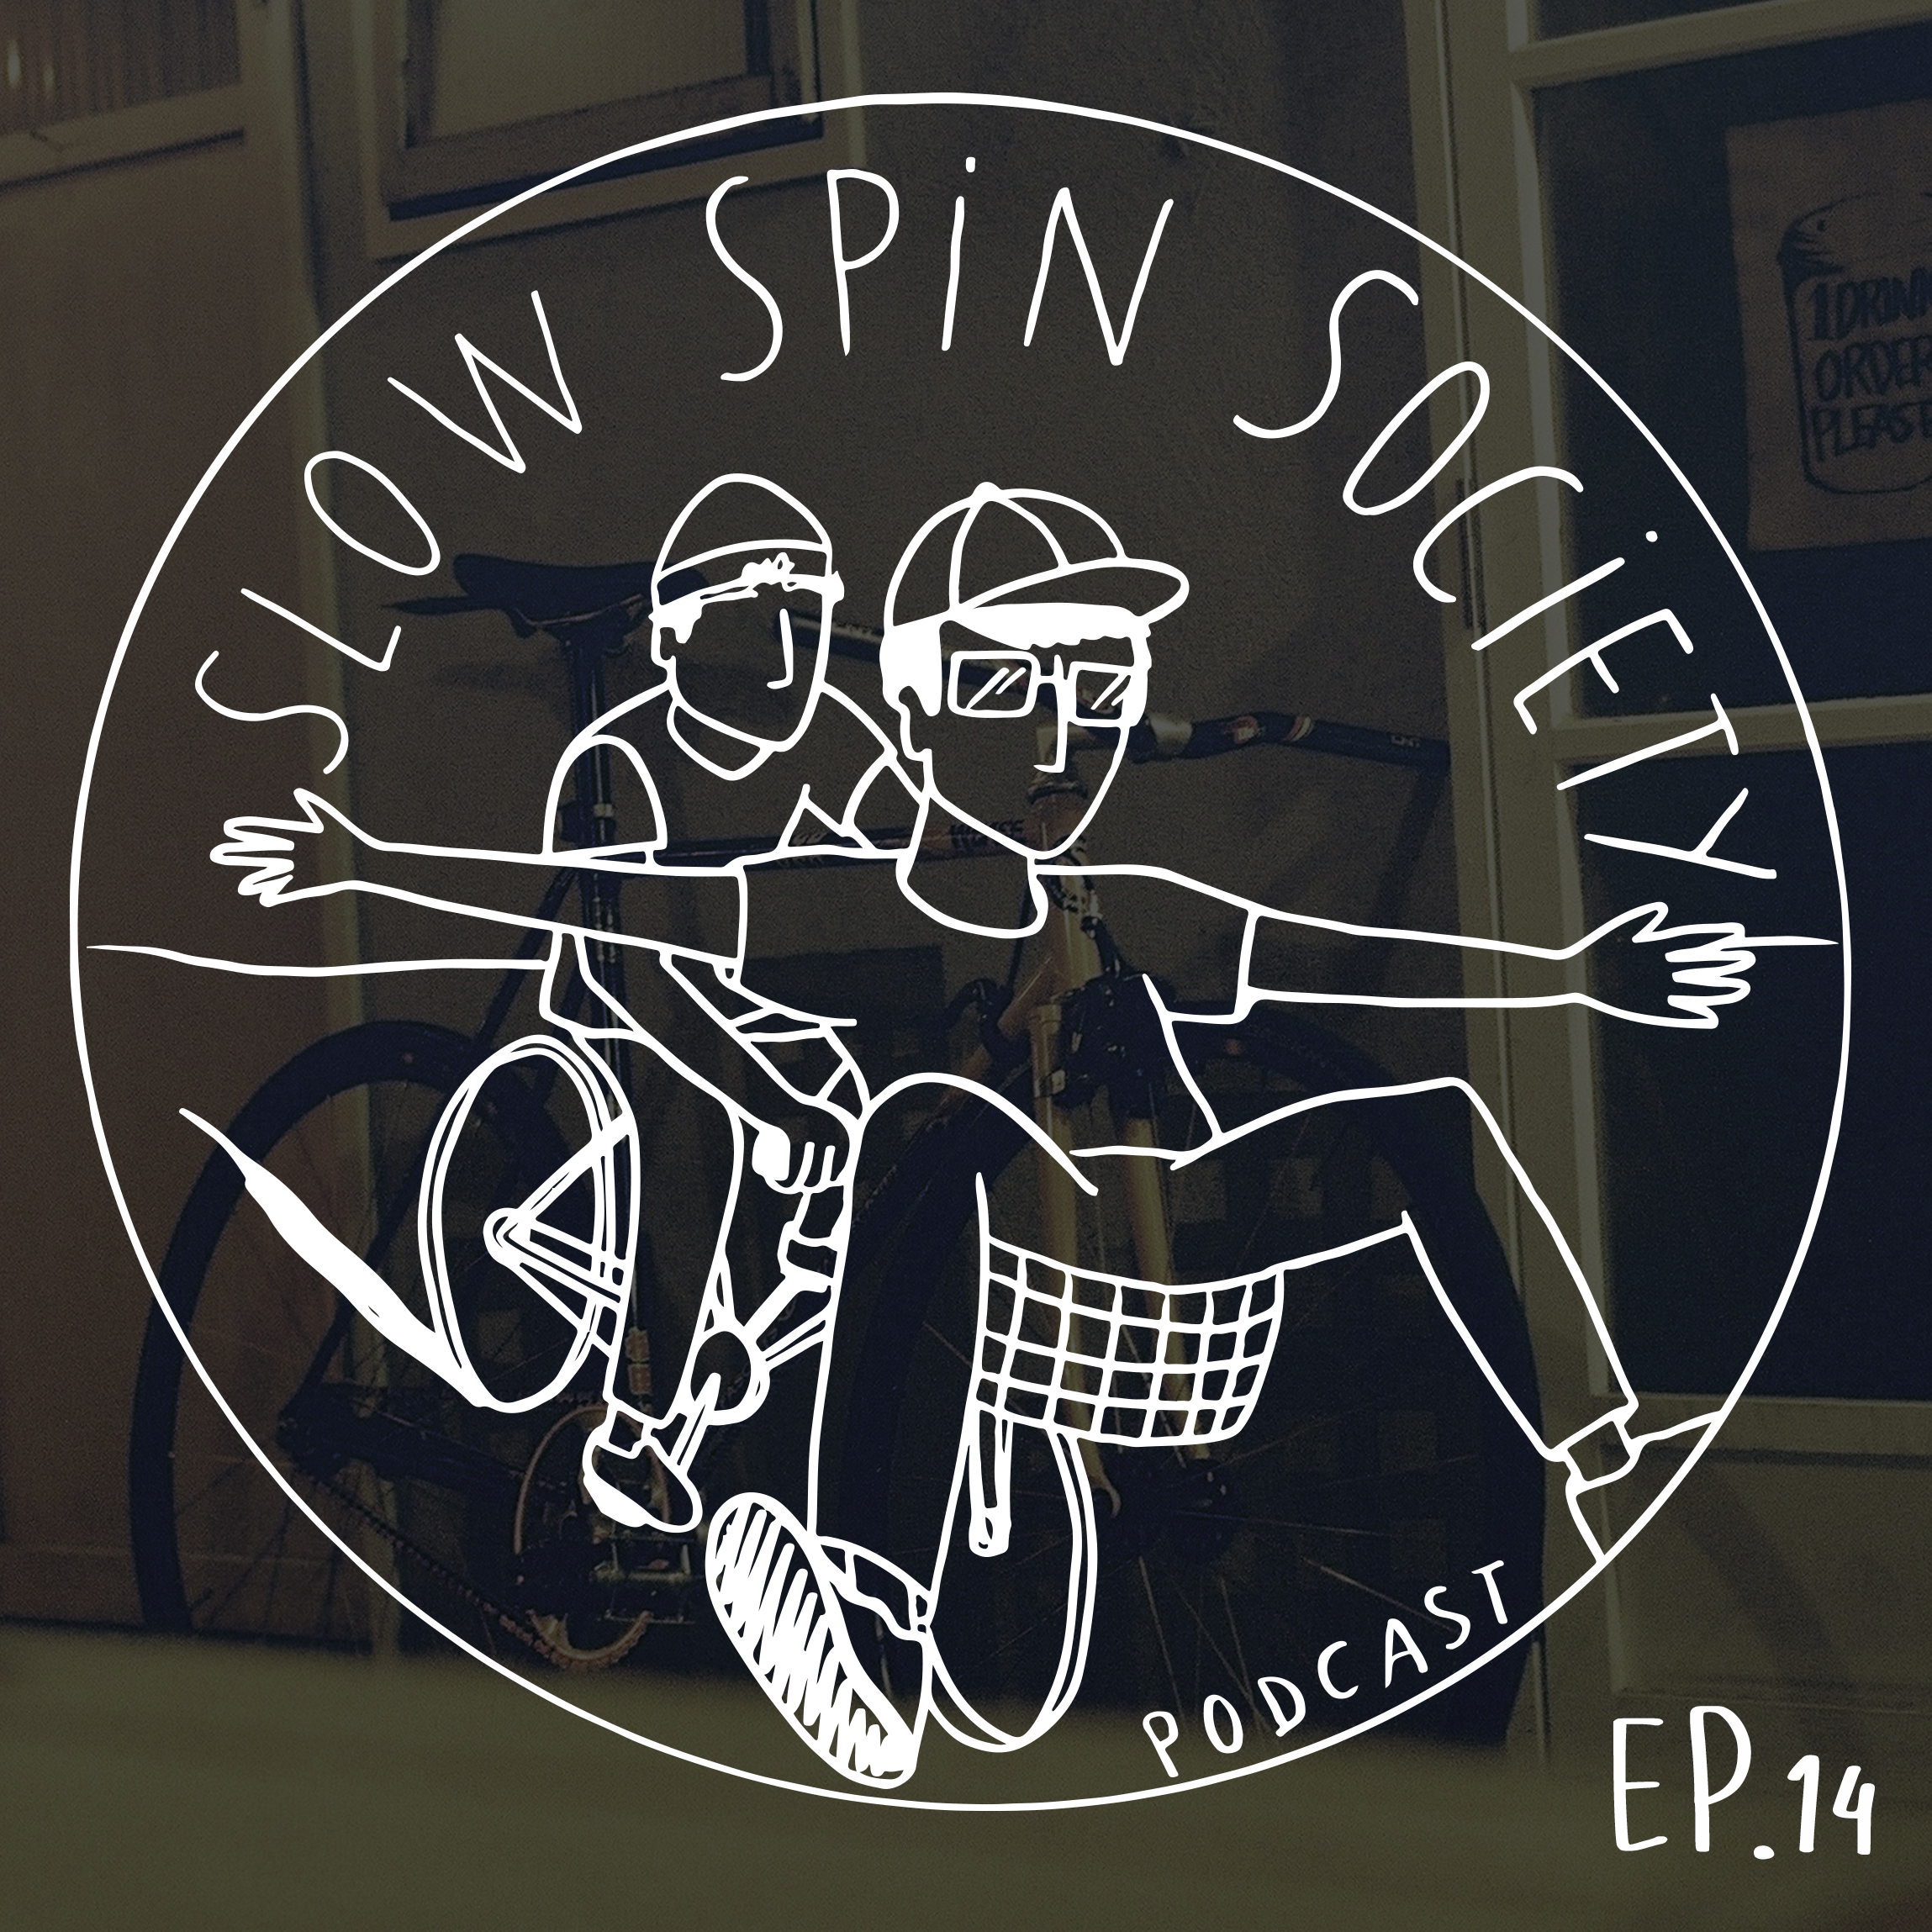 The Slow Spin Society Podcast Ep.14 : Terrible trends and fixed-gear ideas.